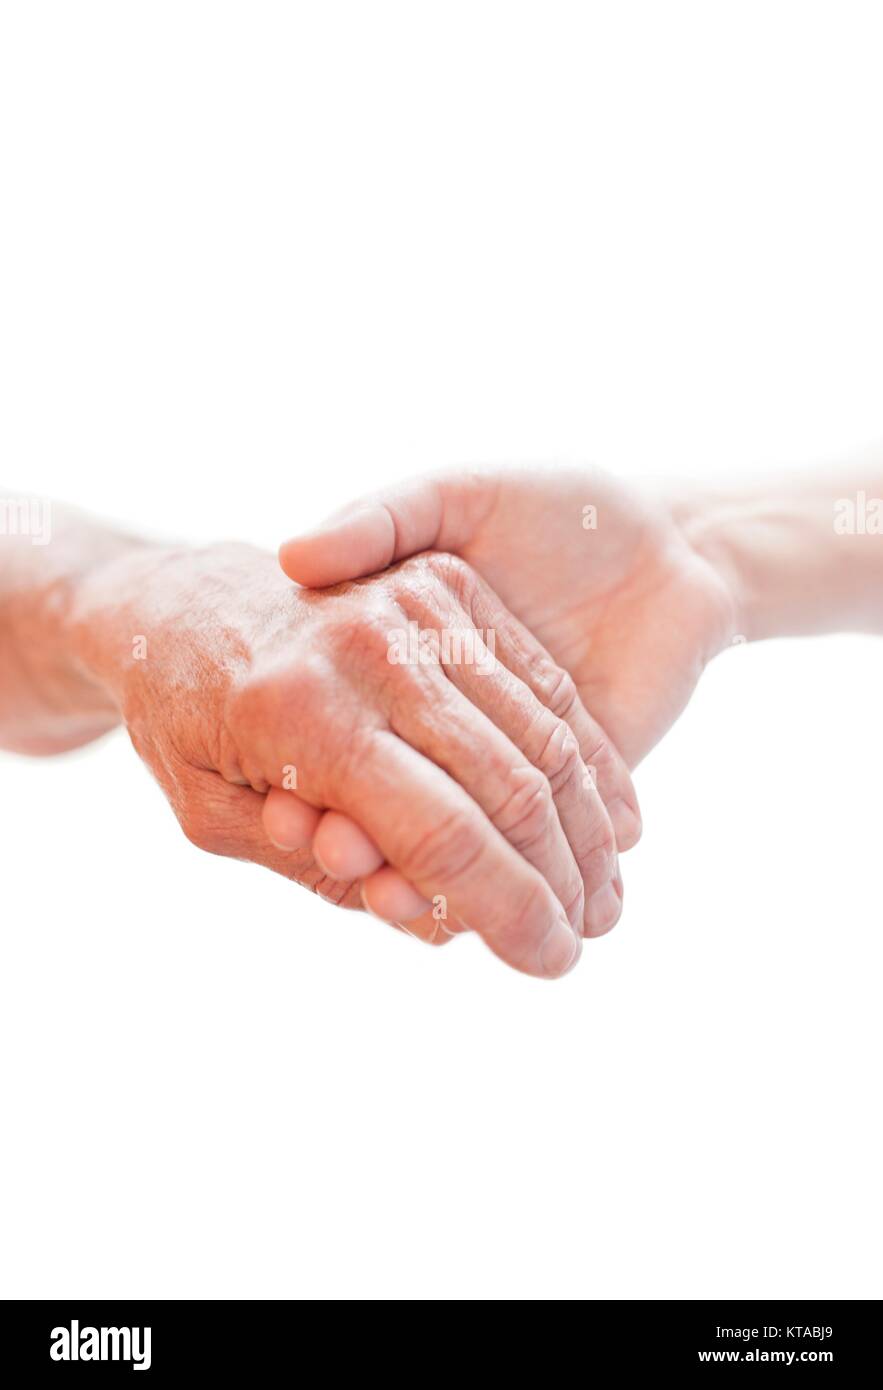 Person holding another's hand, close up. Stock Photo